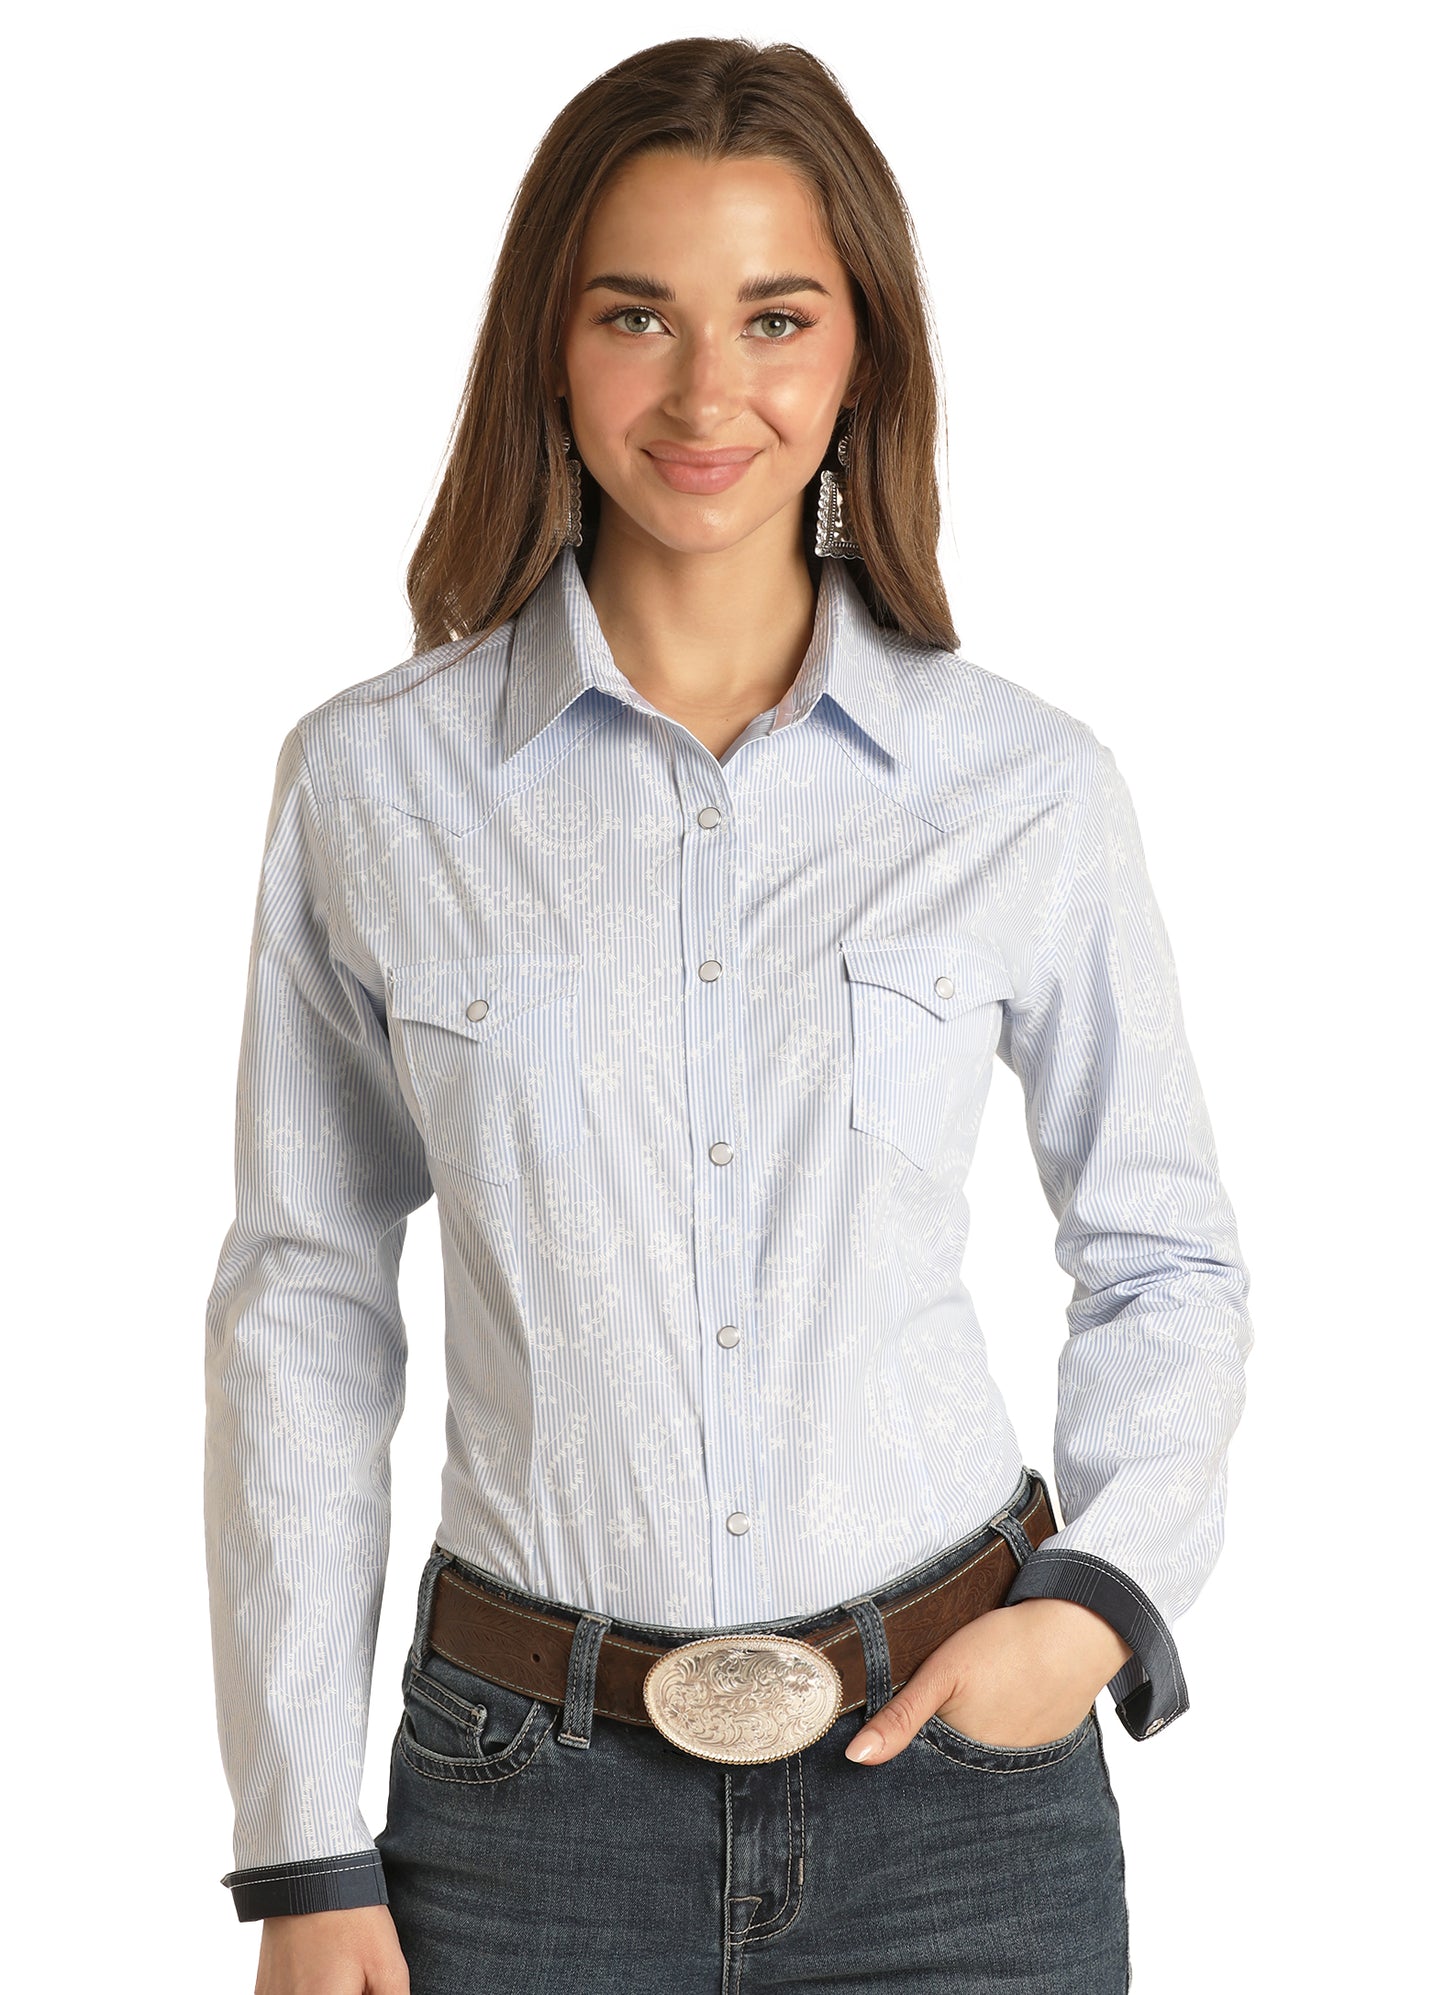 Rock & Roll Panhandle Women's Stripe With Paisley Over Print Long Sleeve Snap Shirt Baby Blue